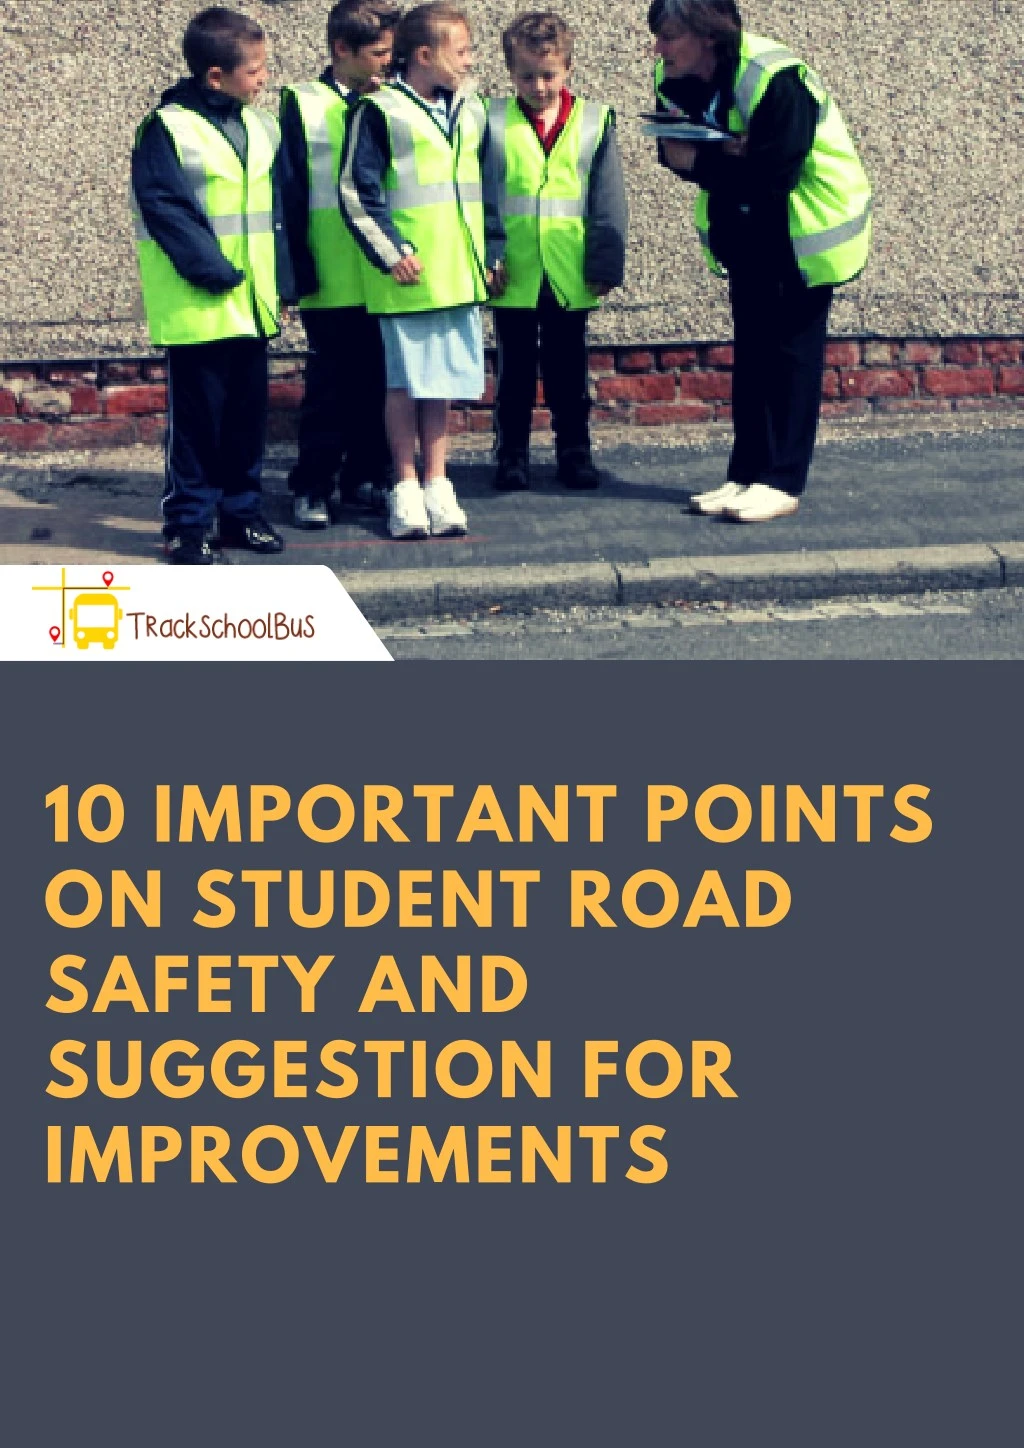 10 important points on student road safety